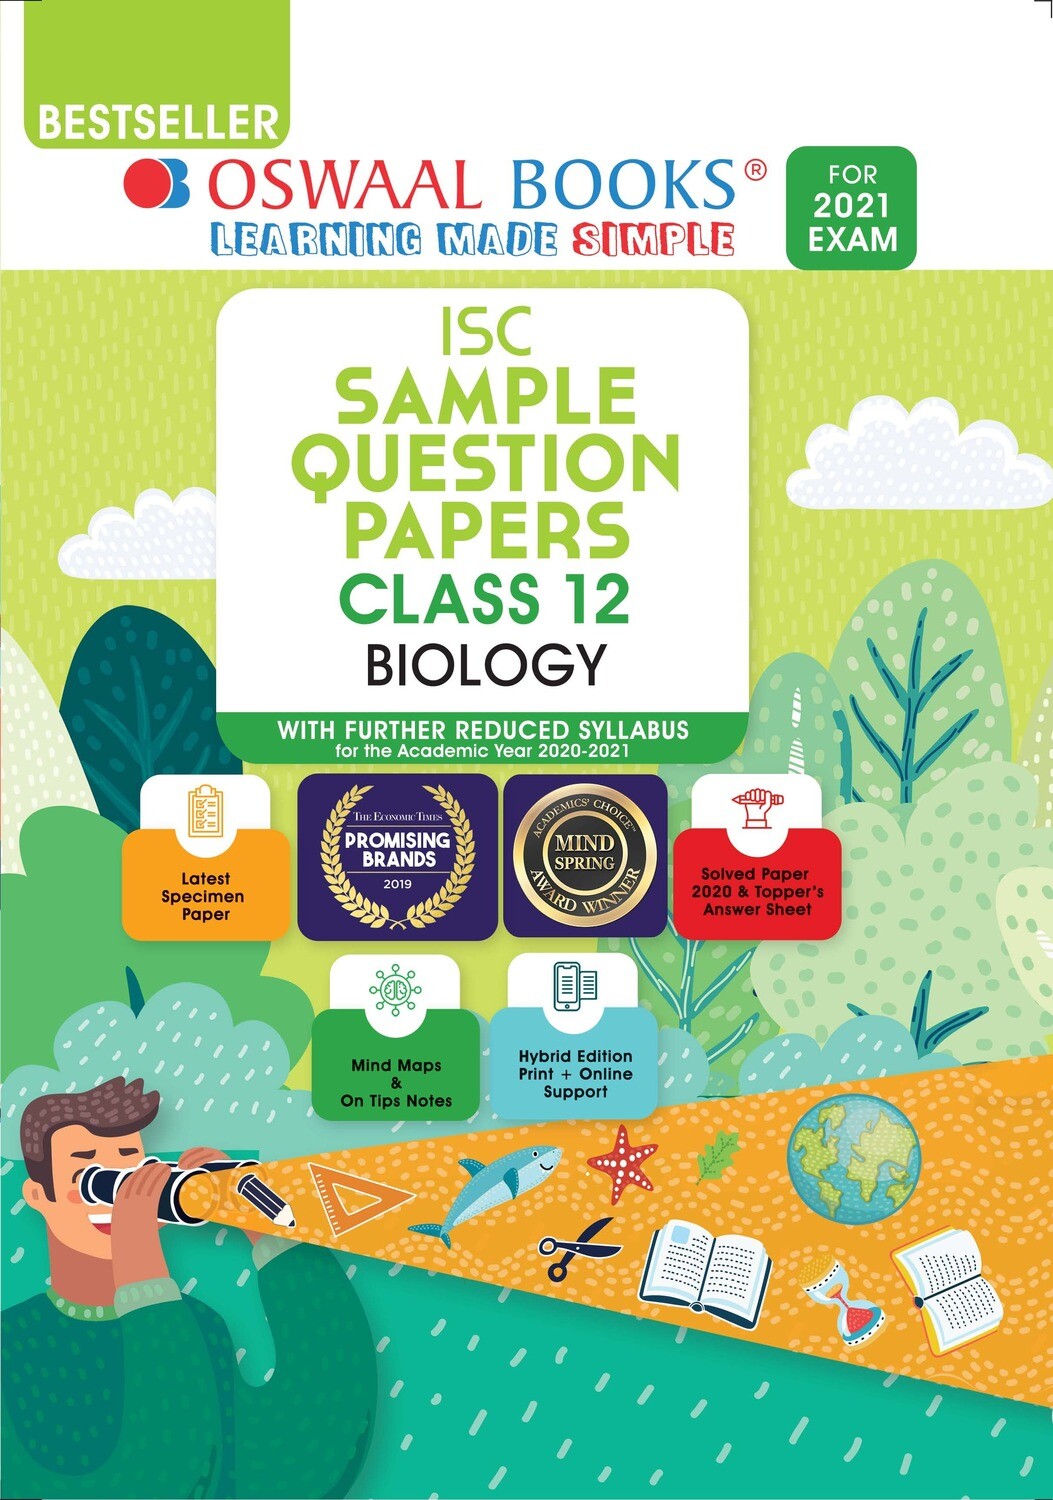 Buy e-book: Oswaal ISC Sample Question Papers Class 12 Biology (For 2021 Exam)